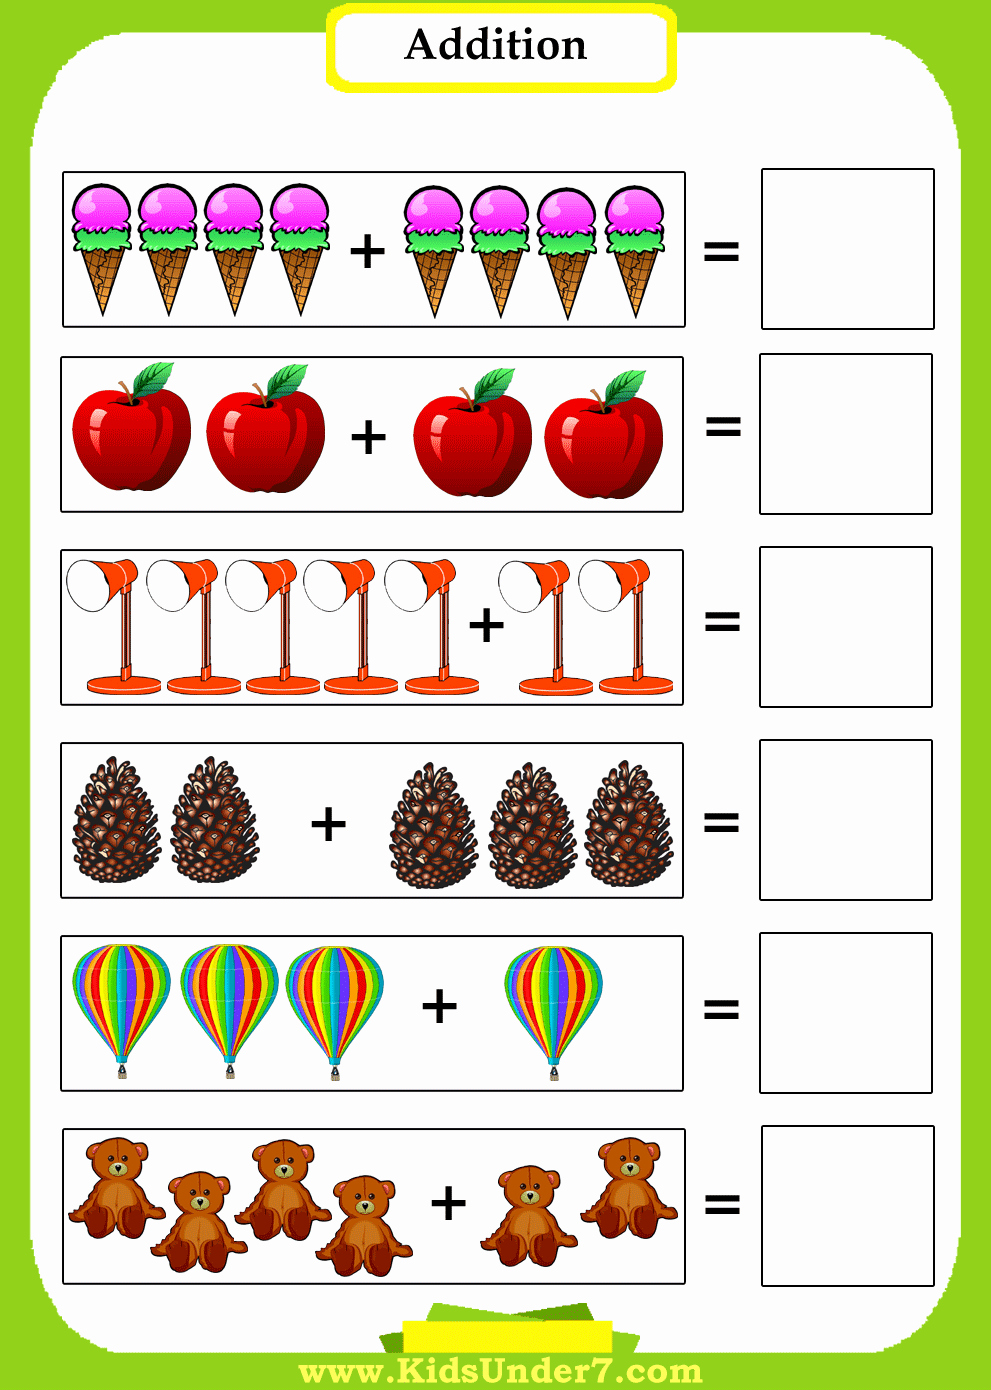 Addition Worksheets with Pictures Inspirational Addition Clipart Preschool Math Addition Preschool Math